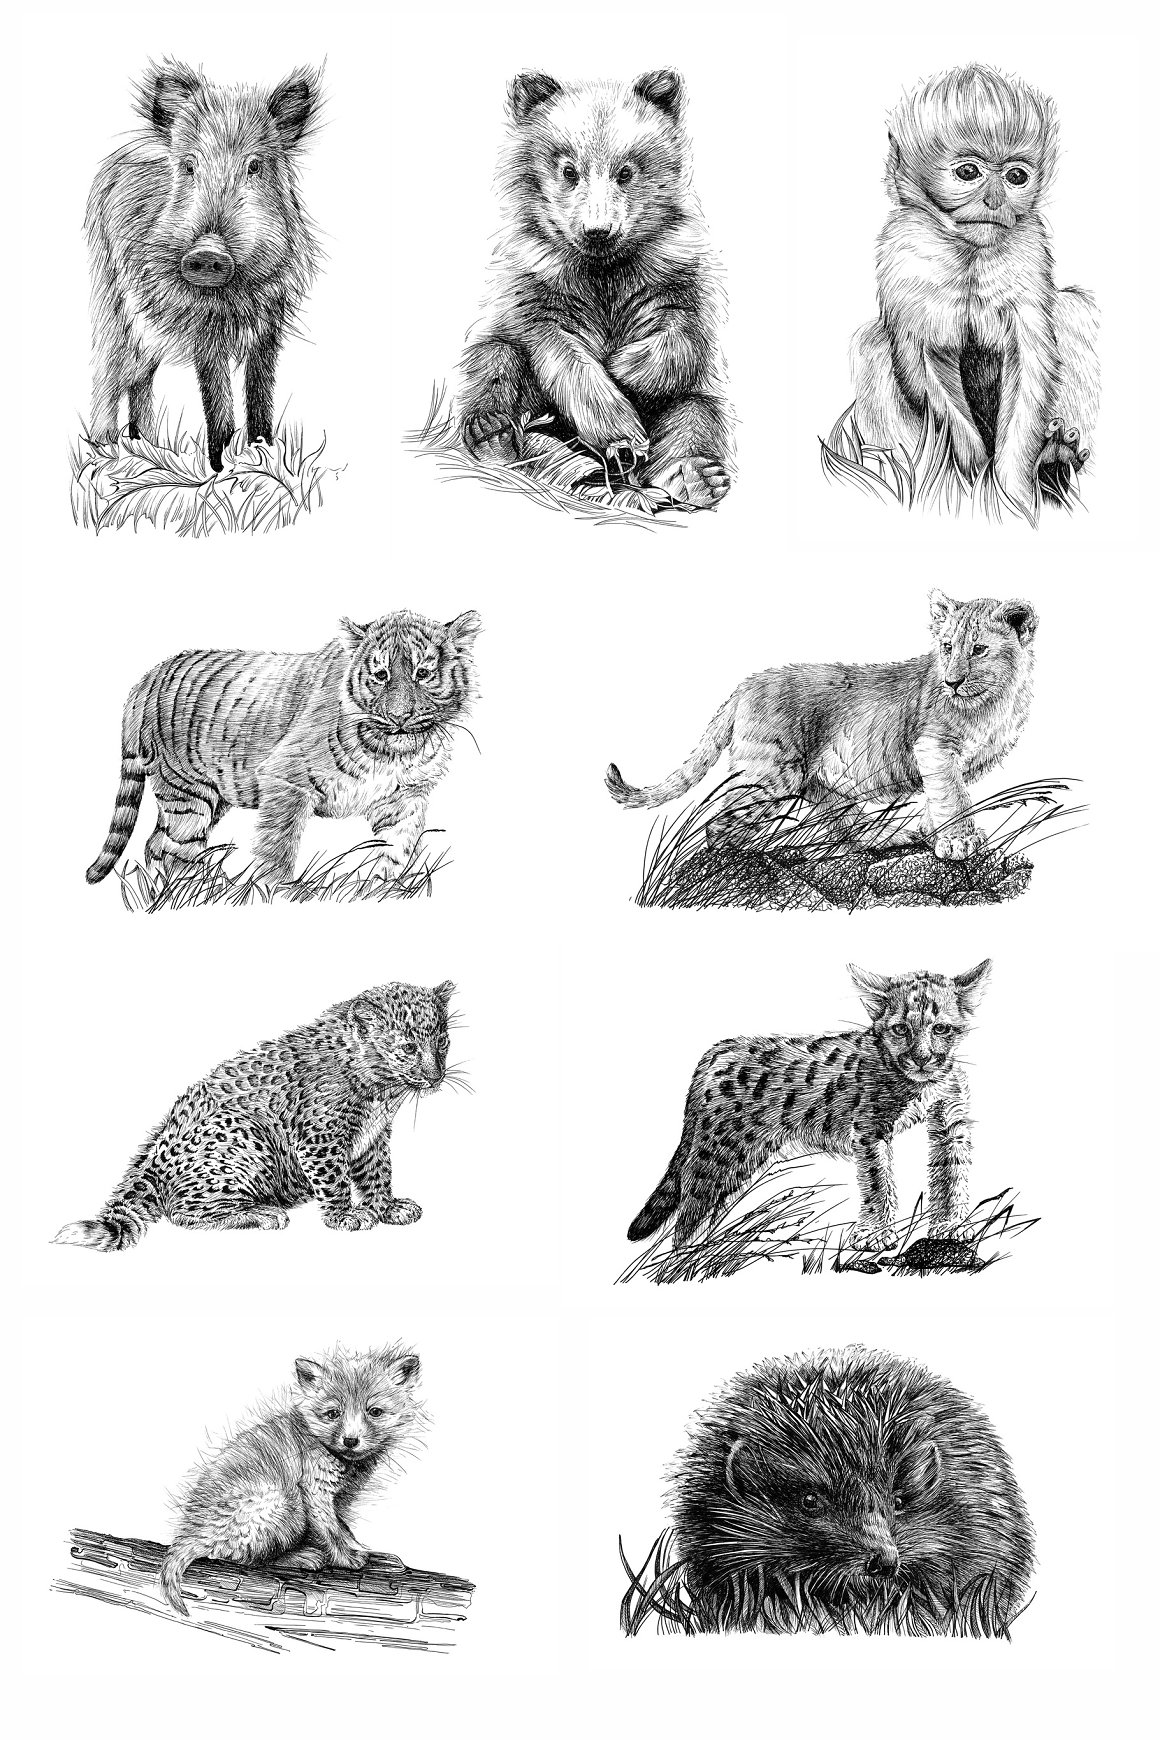 A set of 9 different gray illustrations of baby animals on a white background.